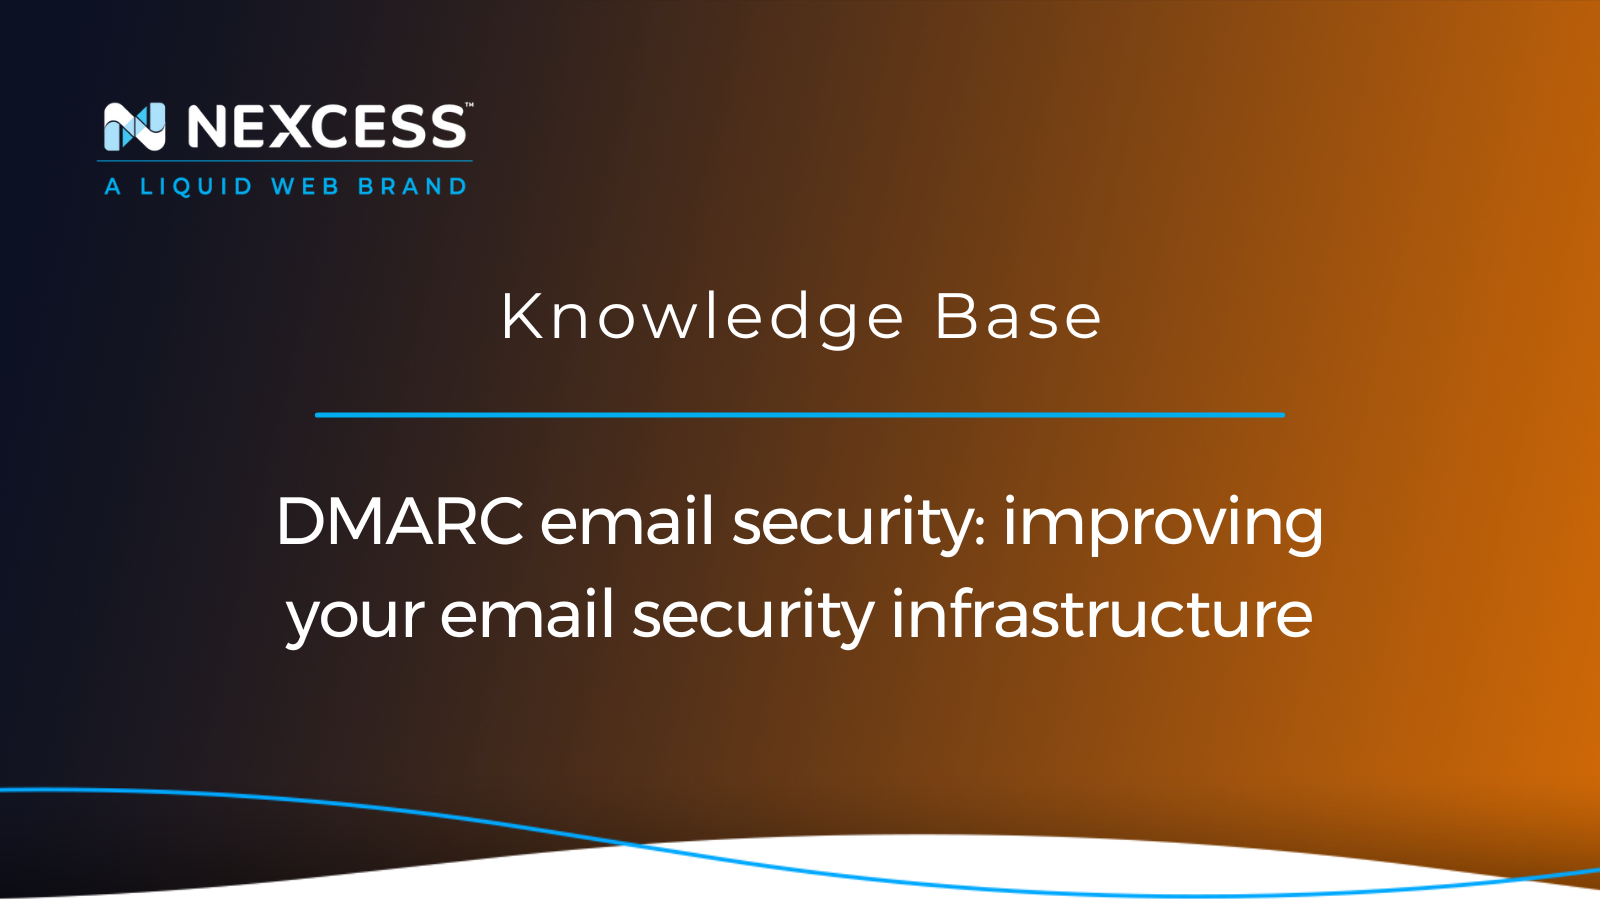 DMARC email security: improving your email security infrastructure